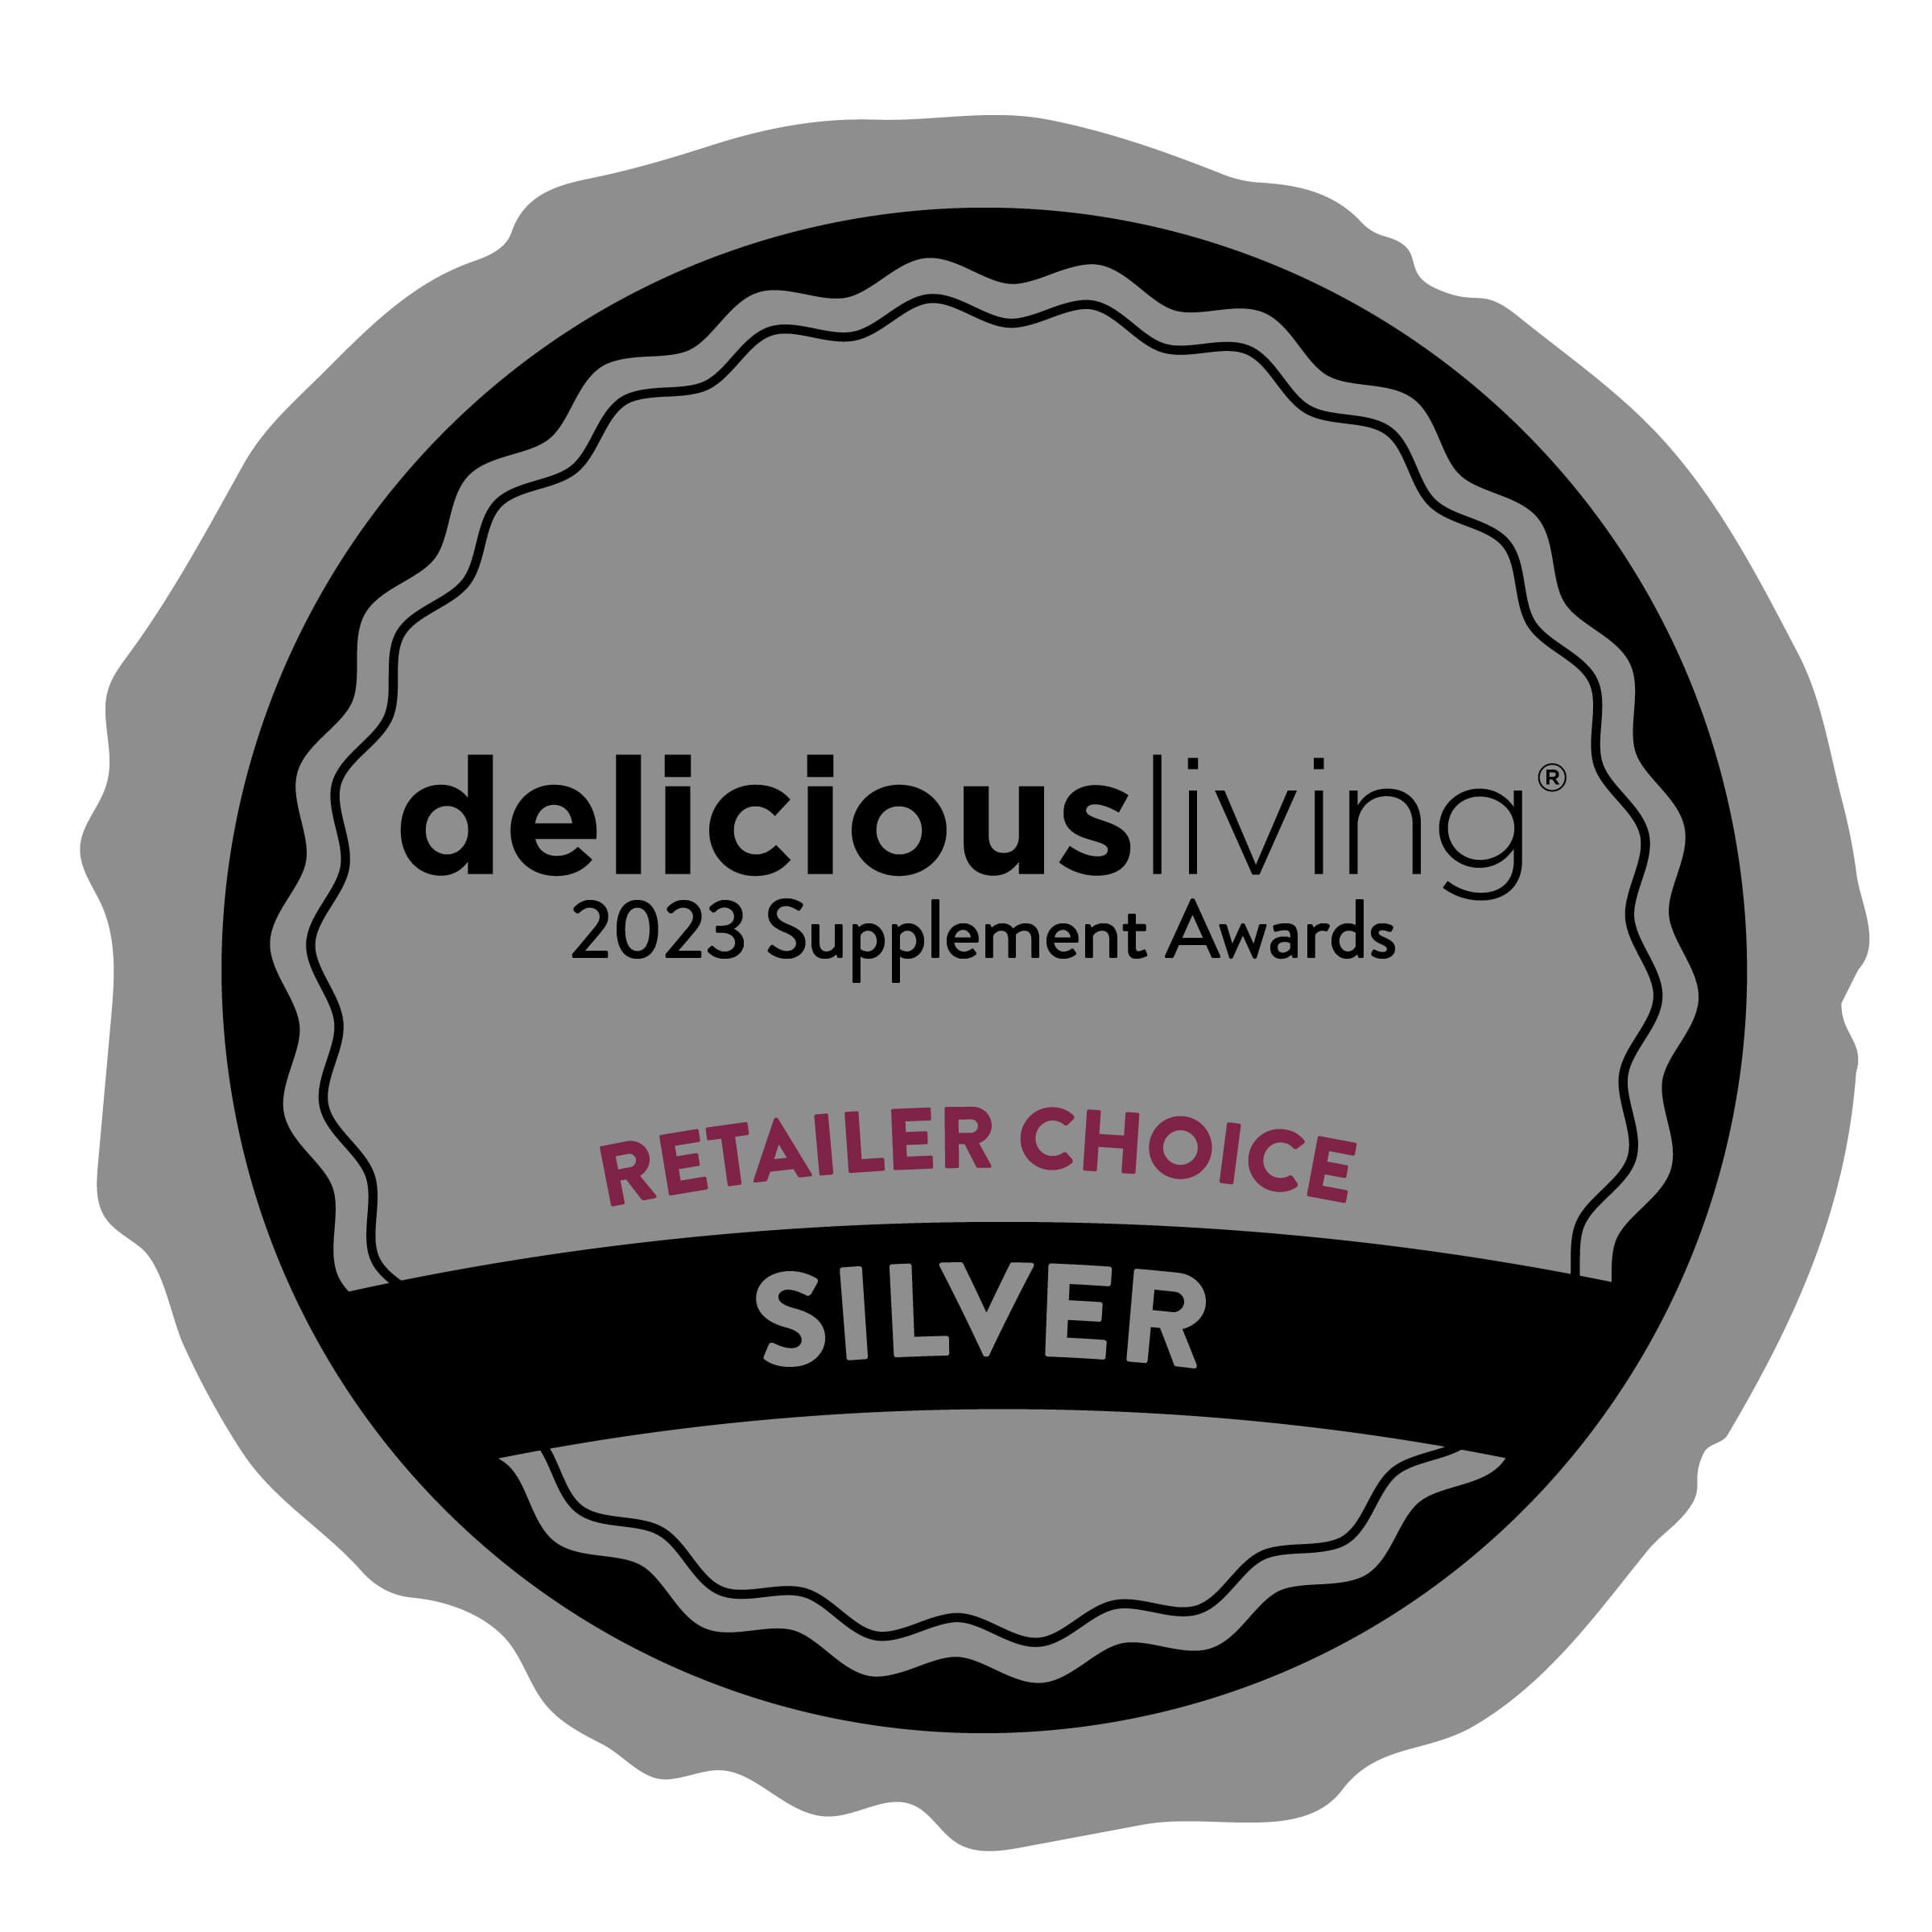 SaltWrap Joint Clinic winsSILVER at Delicious Living Supplement Awards